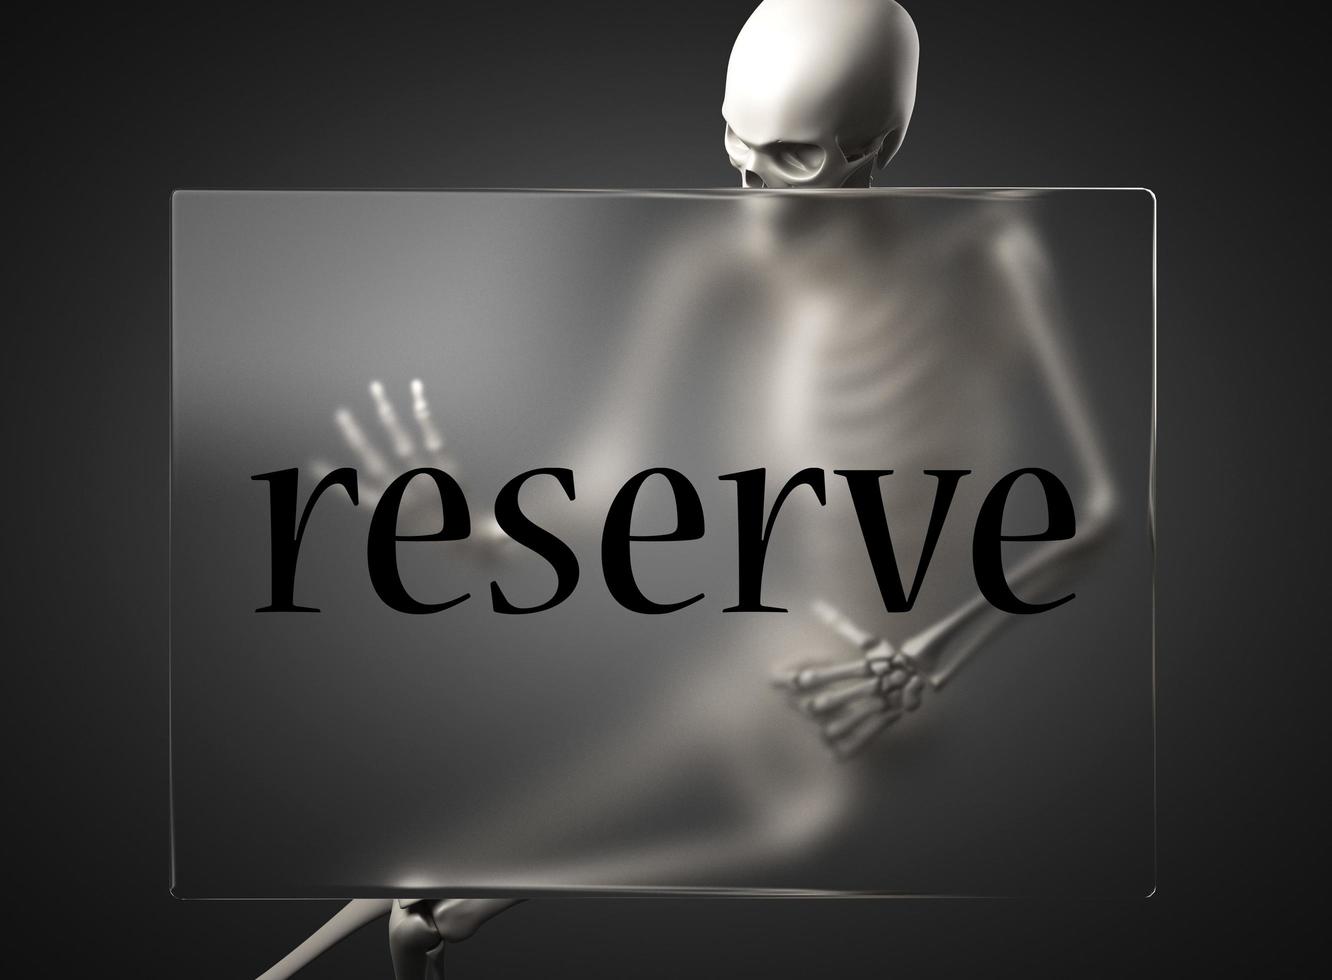 reserve word on glass and skeleton photo